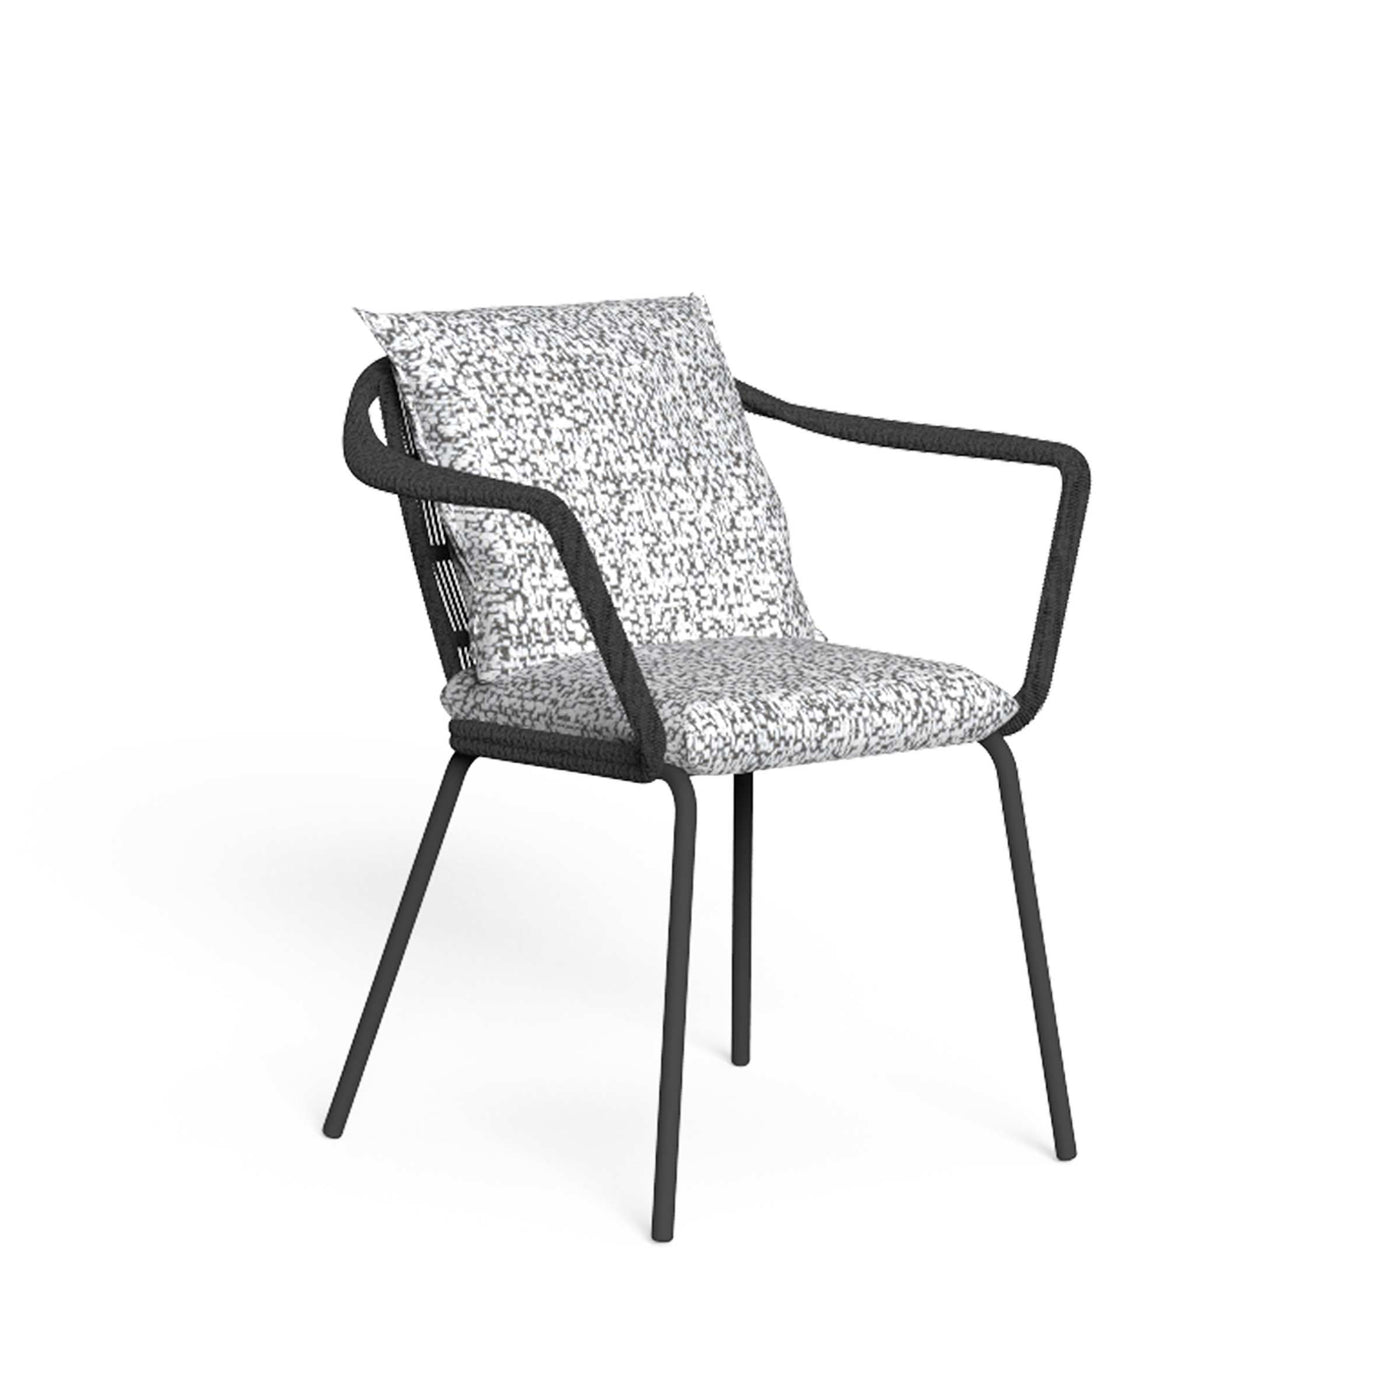 Outdoor Dining Chair CRUISE Alu by Ludovica + Roberto Palomba for Talenti 05